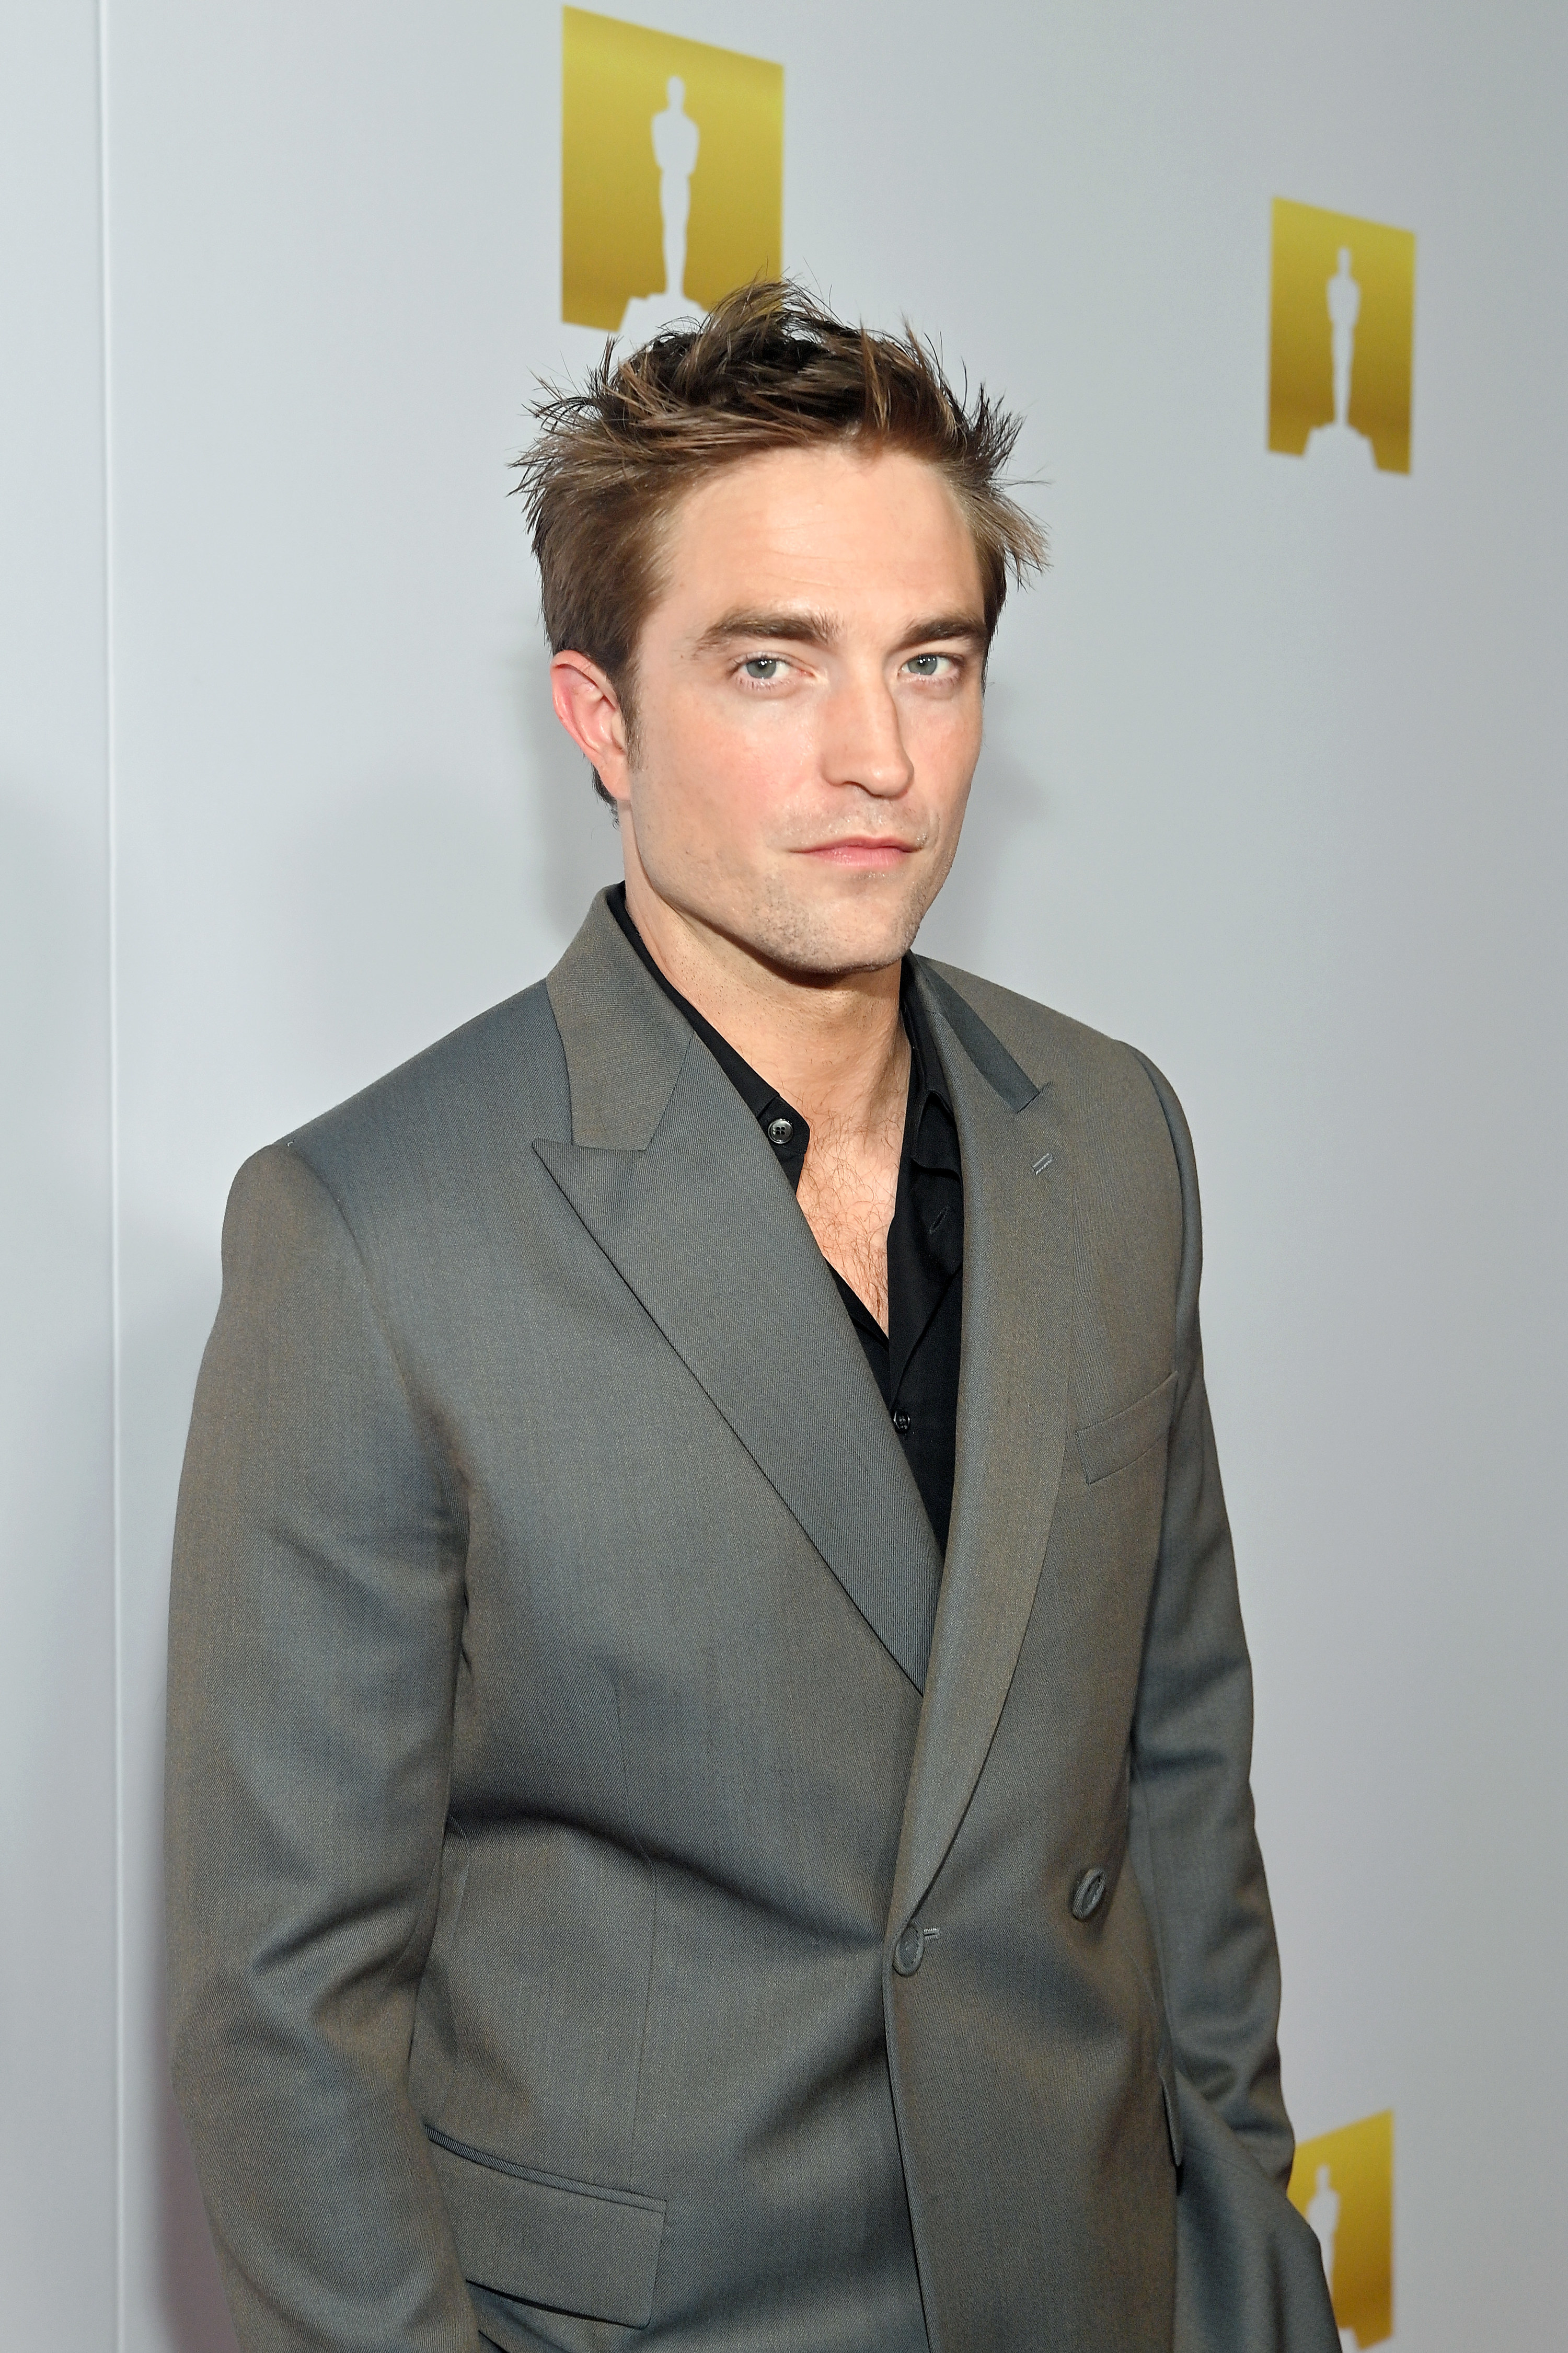 Robert Pattinson attends the Academy Museum of Motion Pictures and Vanity Fair Premiere party at Academy Museum of Motion Pictures on September 29, 2021 in Los Angeles, California